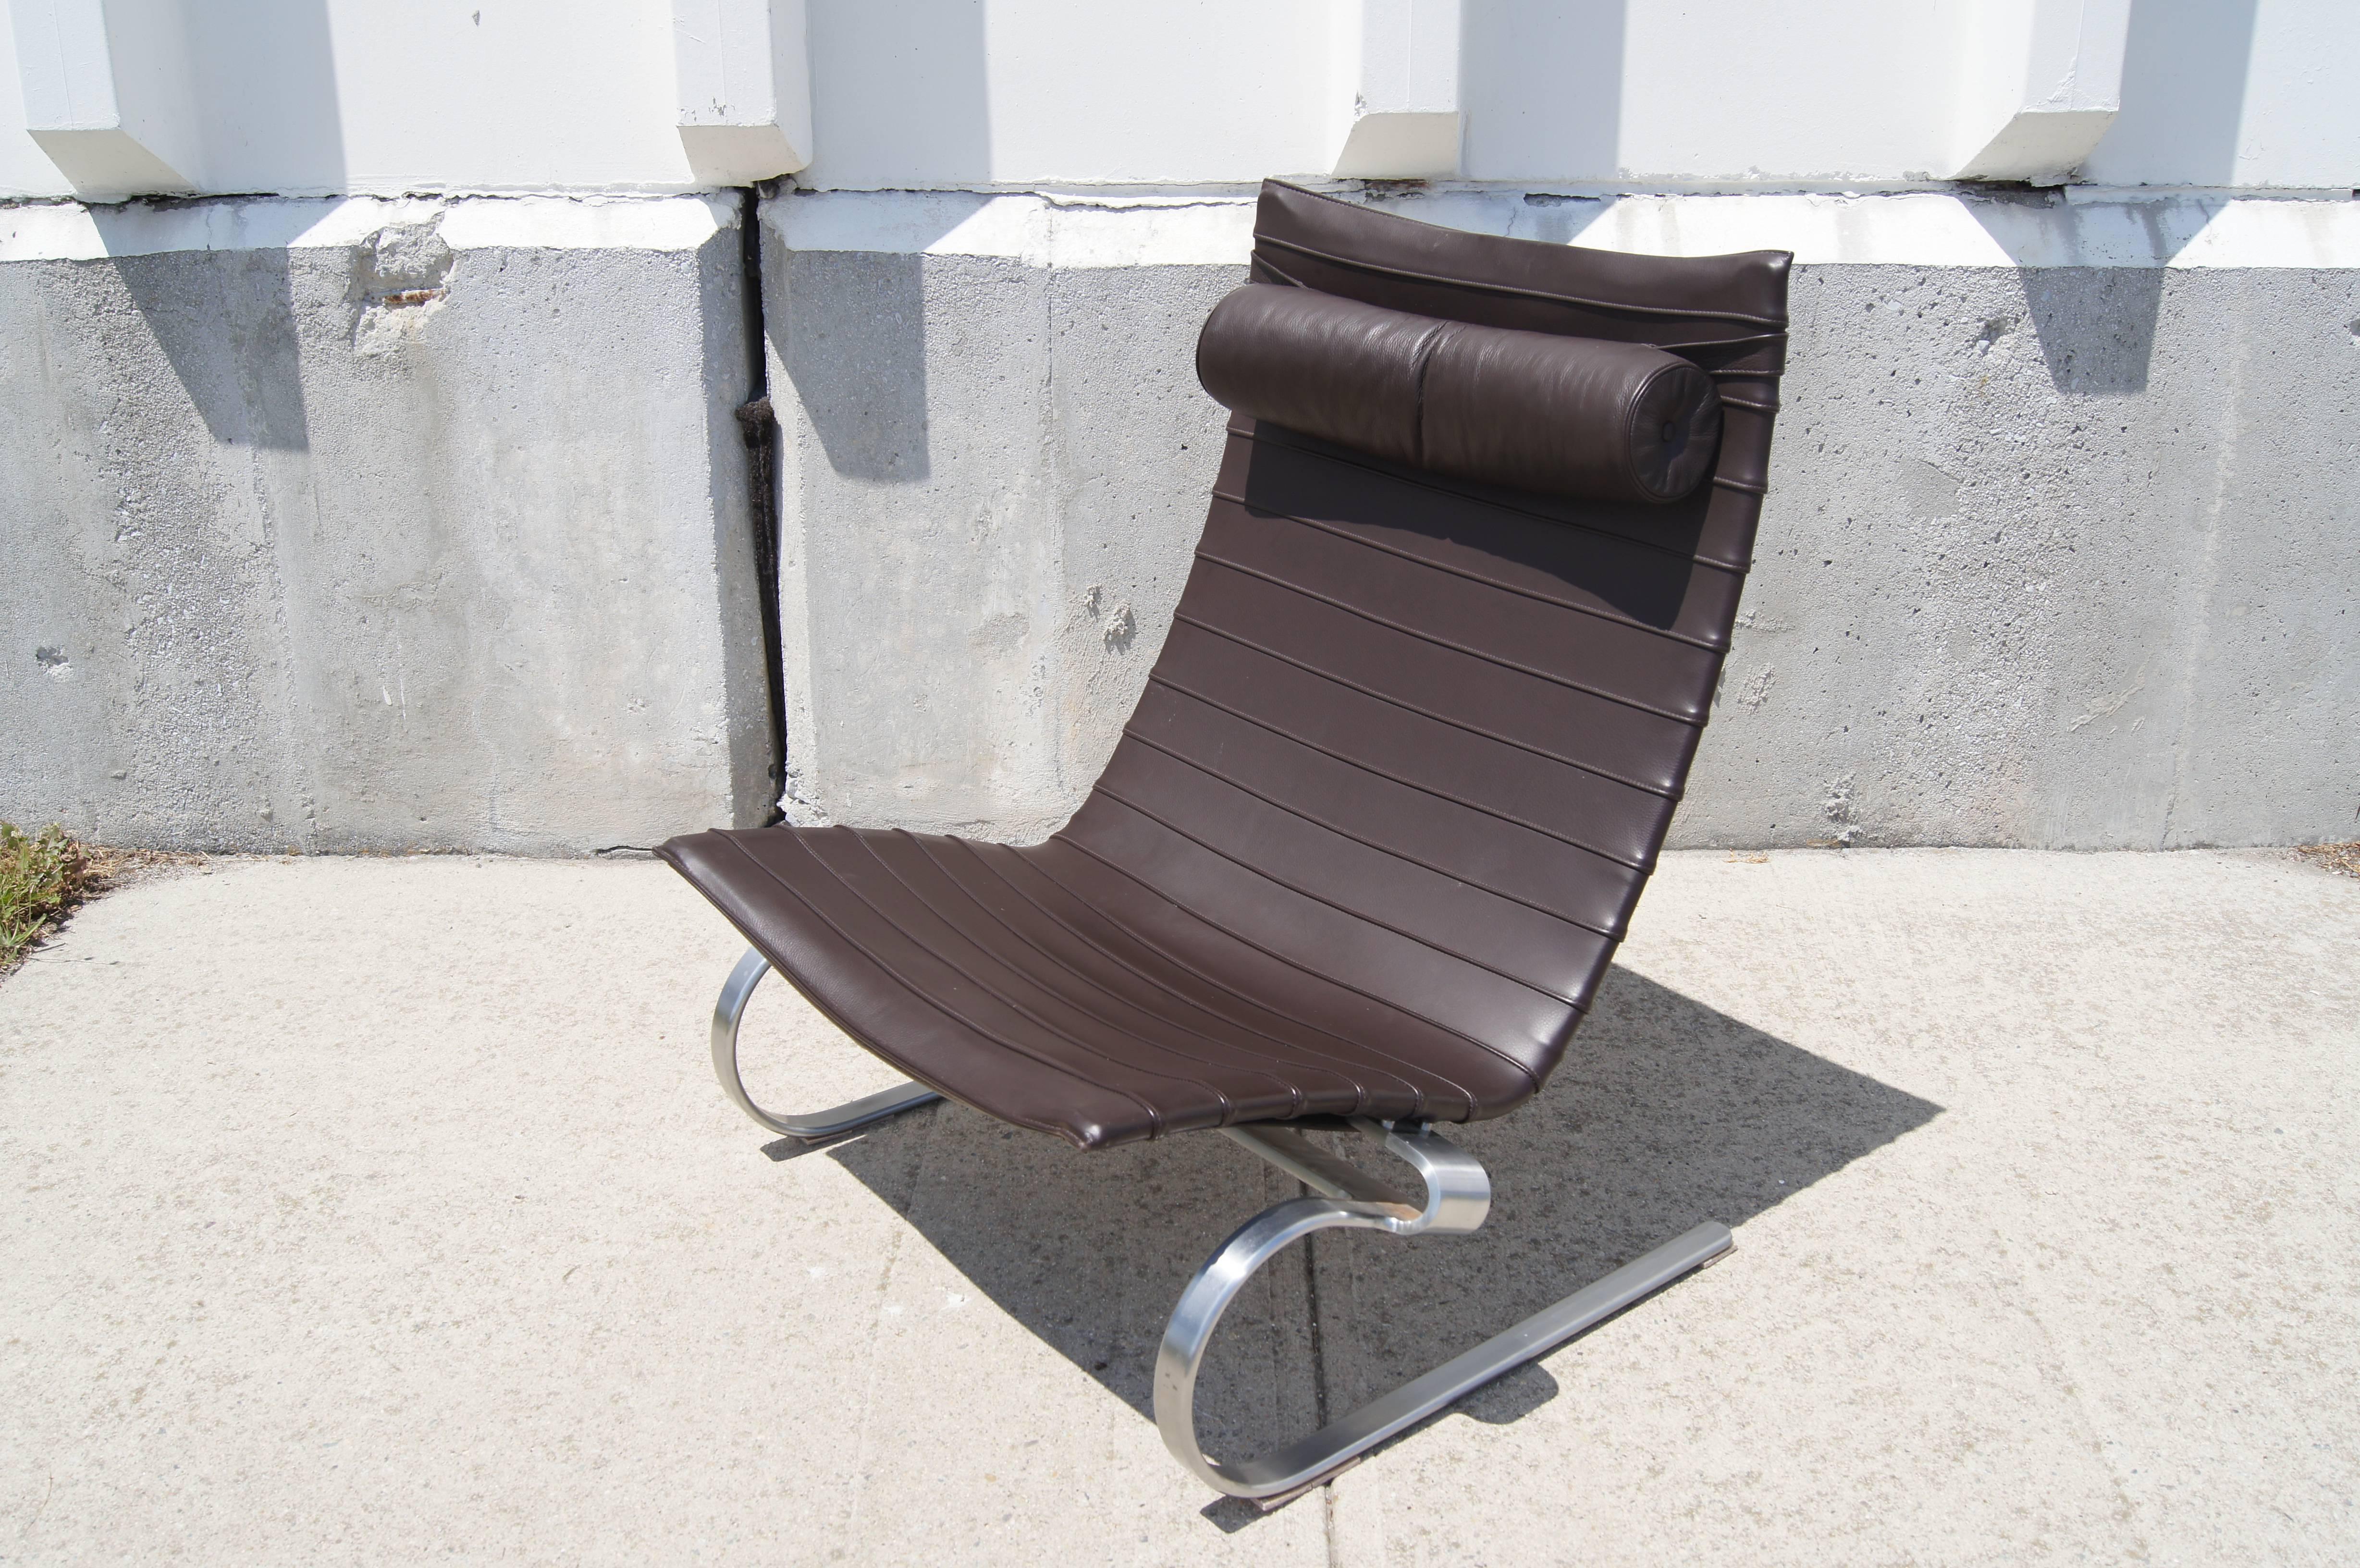 Designed in 1967 by Poul Kjaerholm and later produced by Fritz Hansen, the PK20 is an elegantly comfortable lounge chair. Sitting on base of flexible matte chromed steel is a generous high-backed seat with matching headrest. This chair is